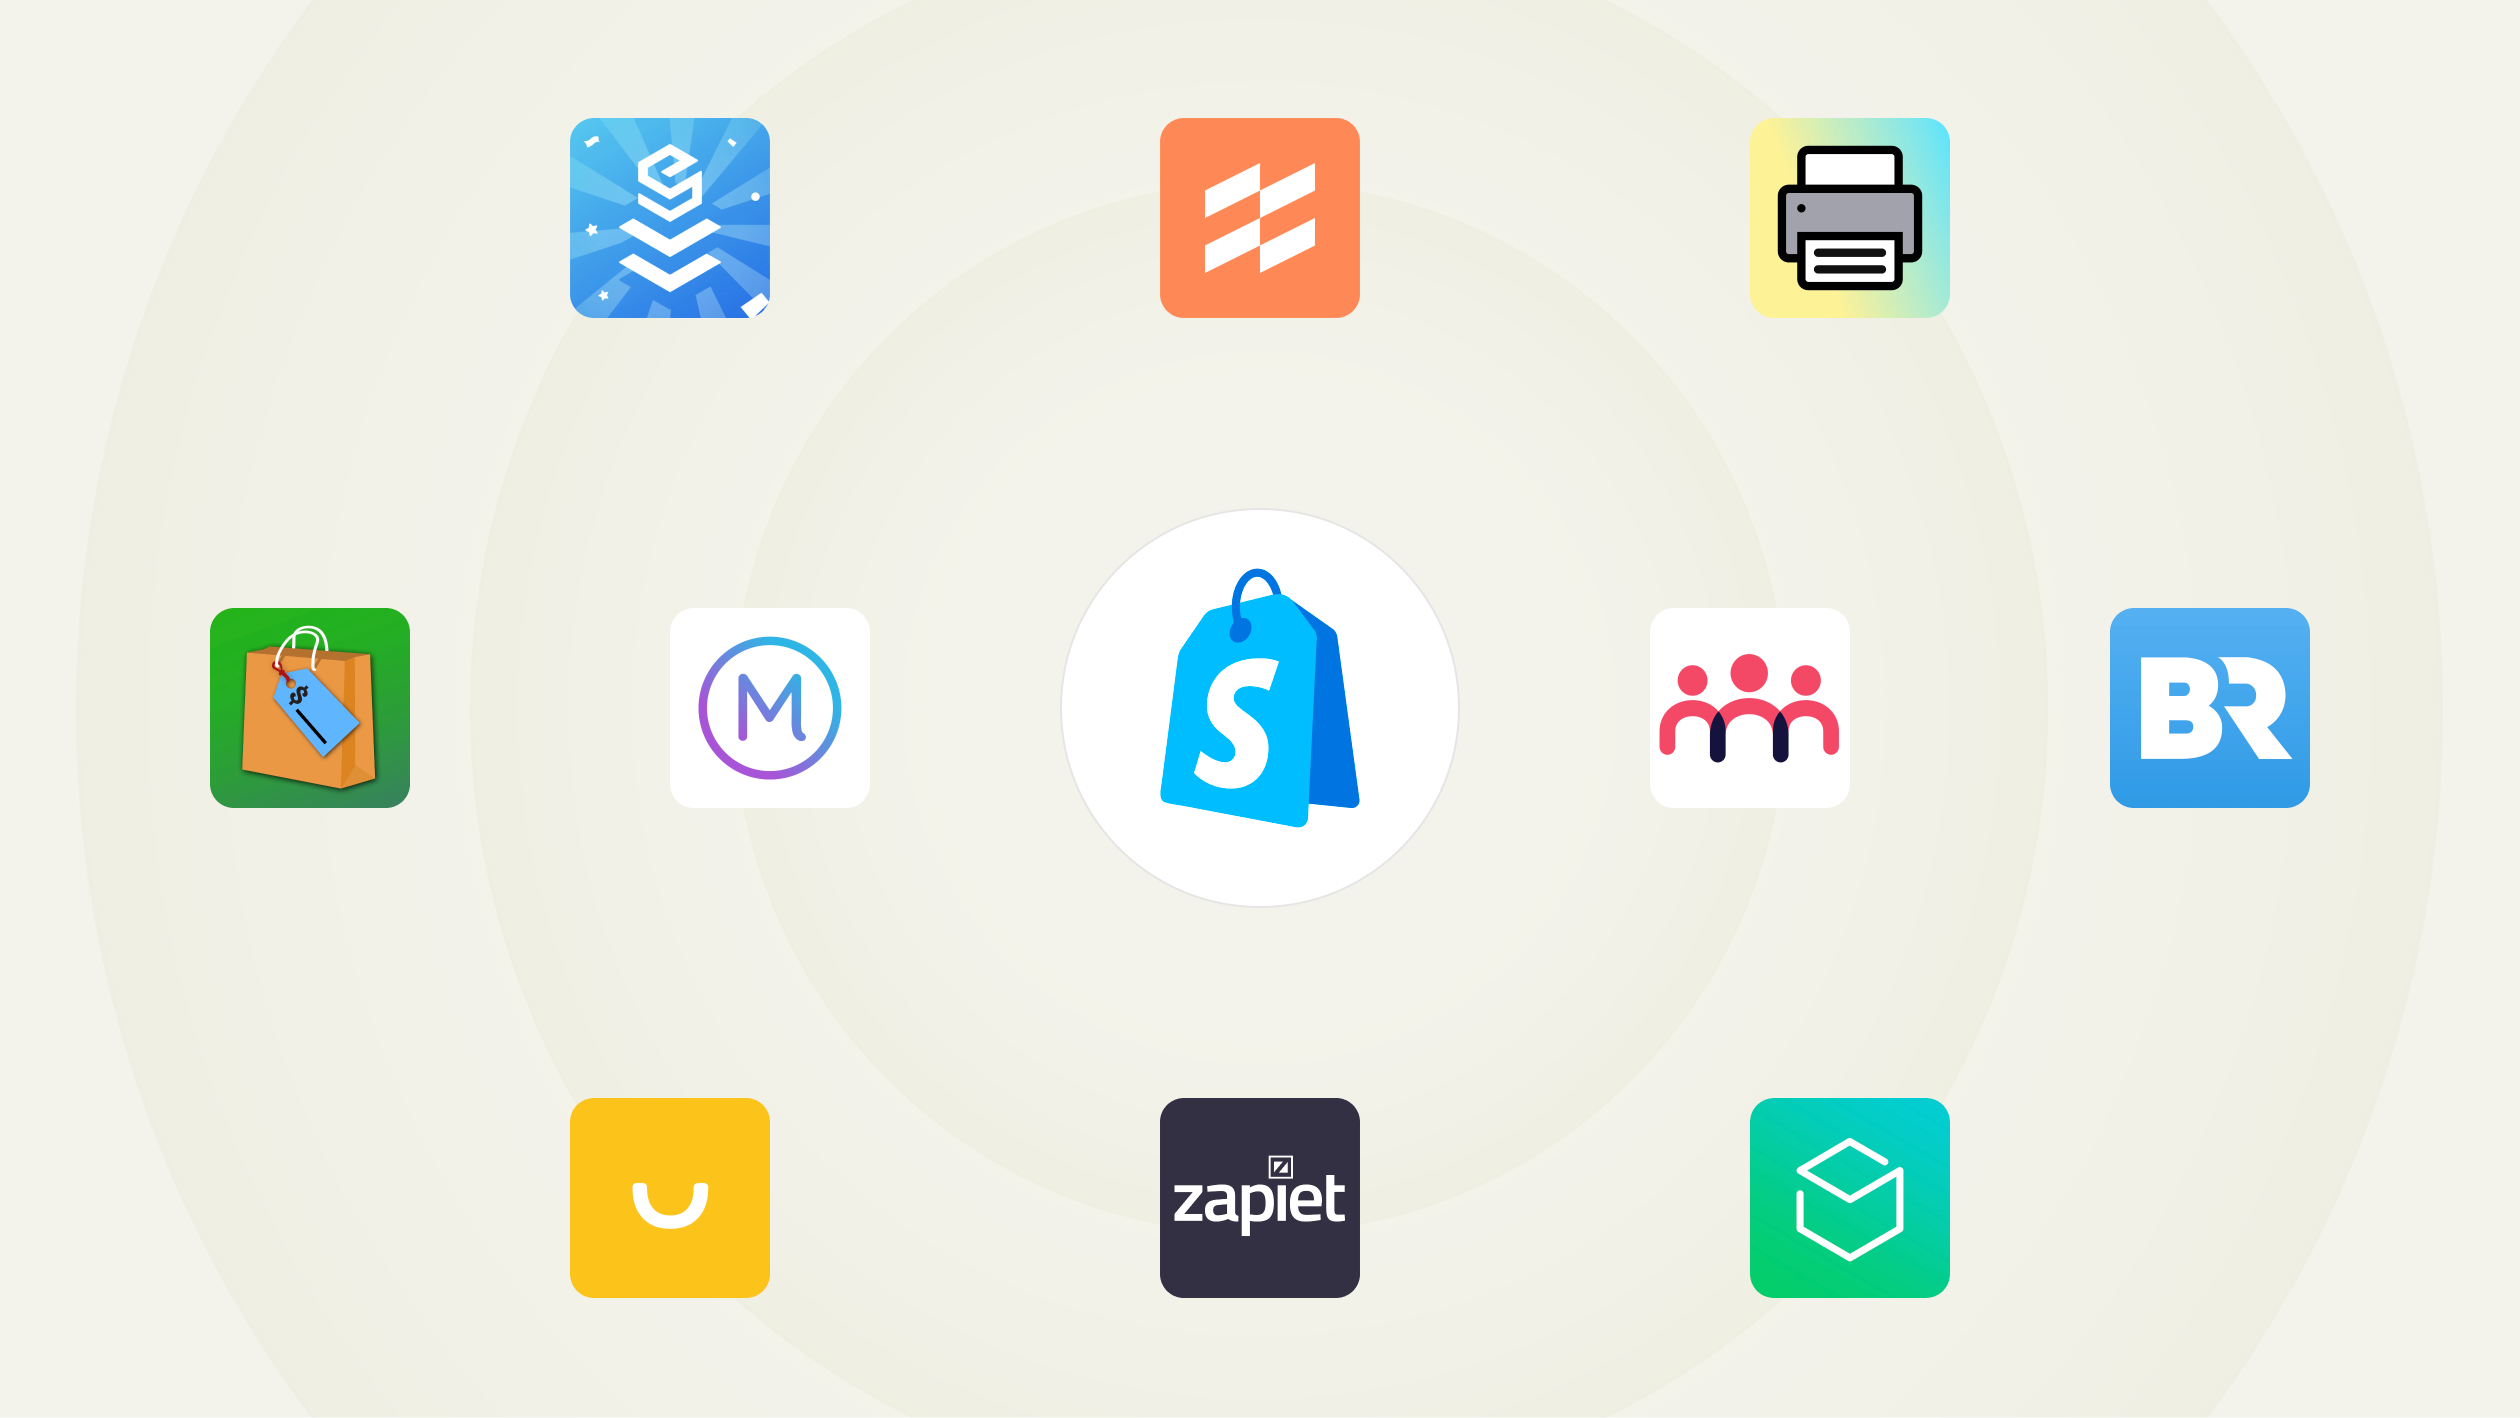 A collection of app icons. In the middle is the Shopify POS logo; around the logo are icons for poular apps: EasyTeam, Filljoy, Zapiet, Optizio, Stocky, Order Printer, Smile, Better Reports, Marsello, and Endear.